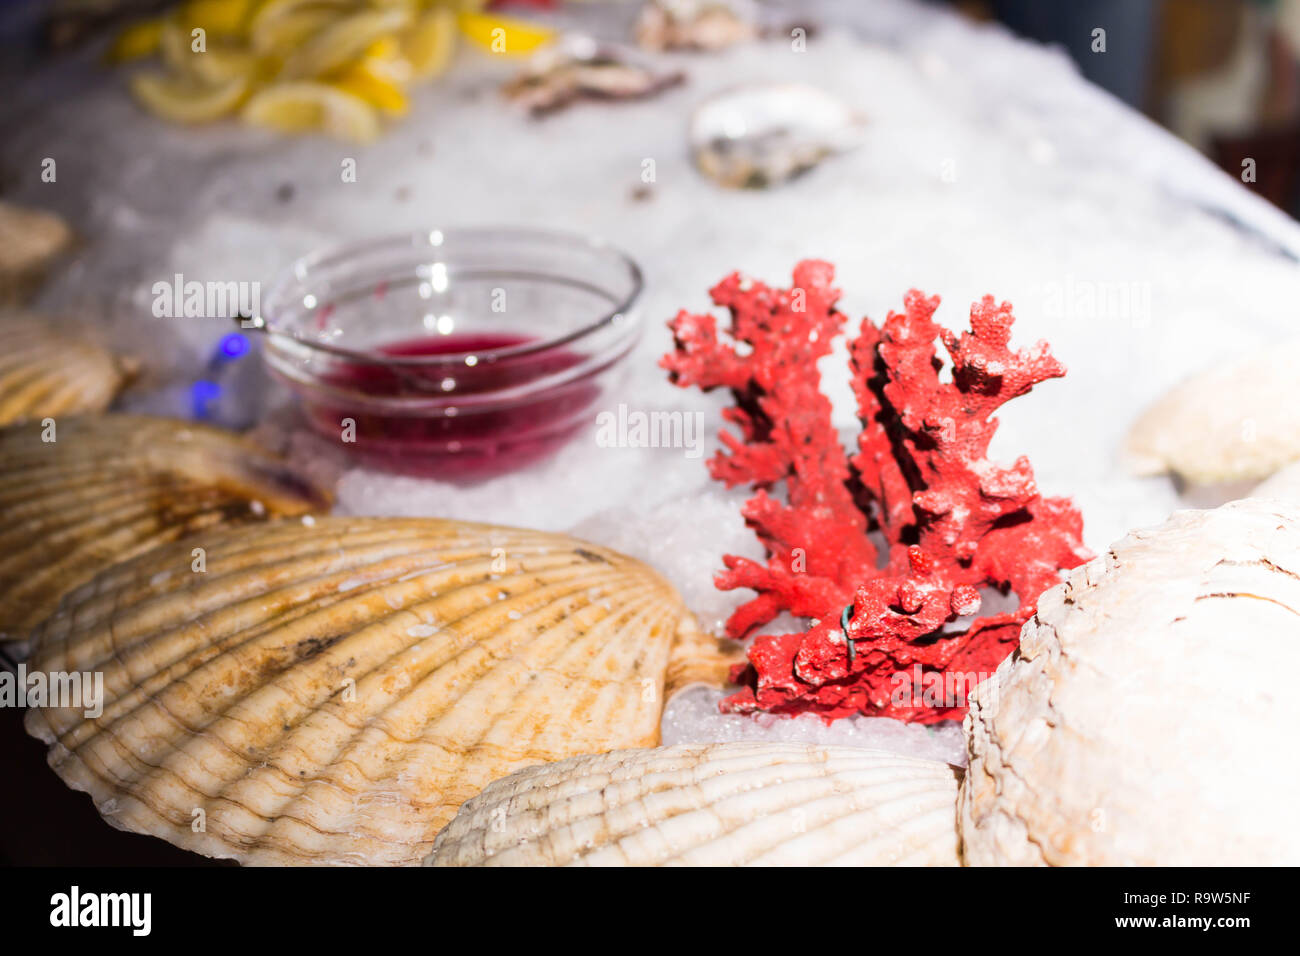 Serving place with ice, lemons, shells and oyster Stock Photo